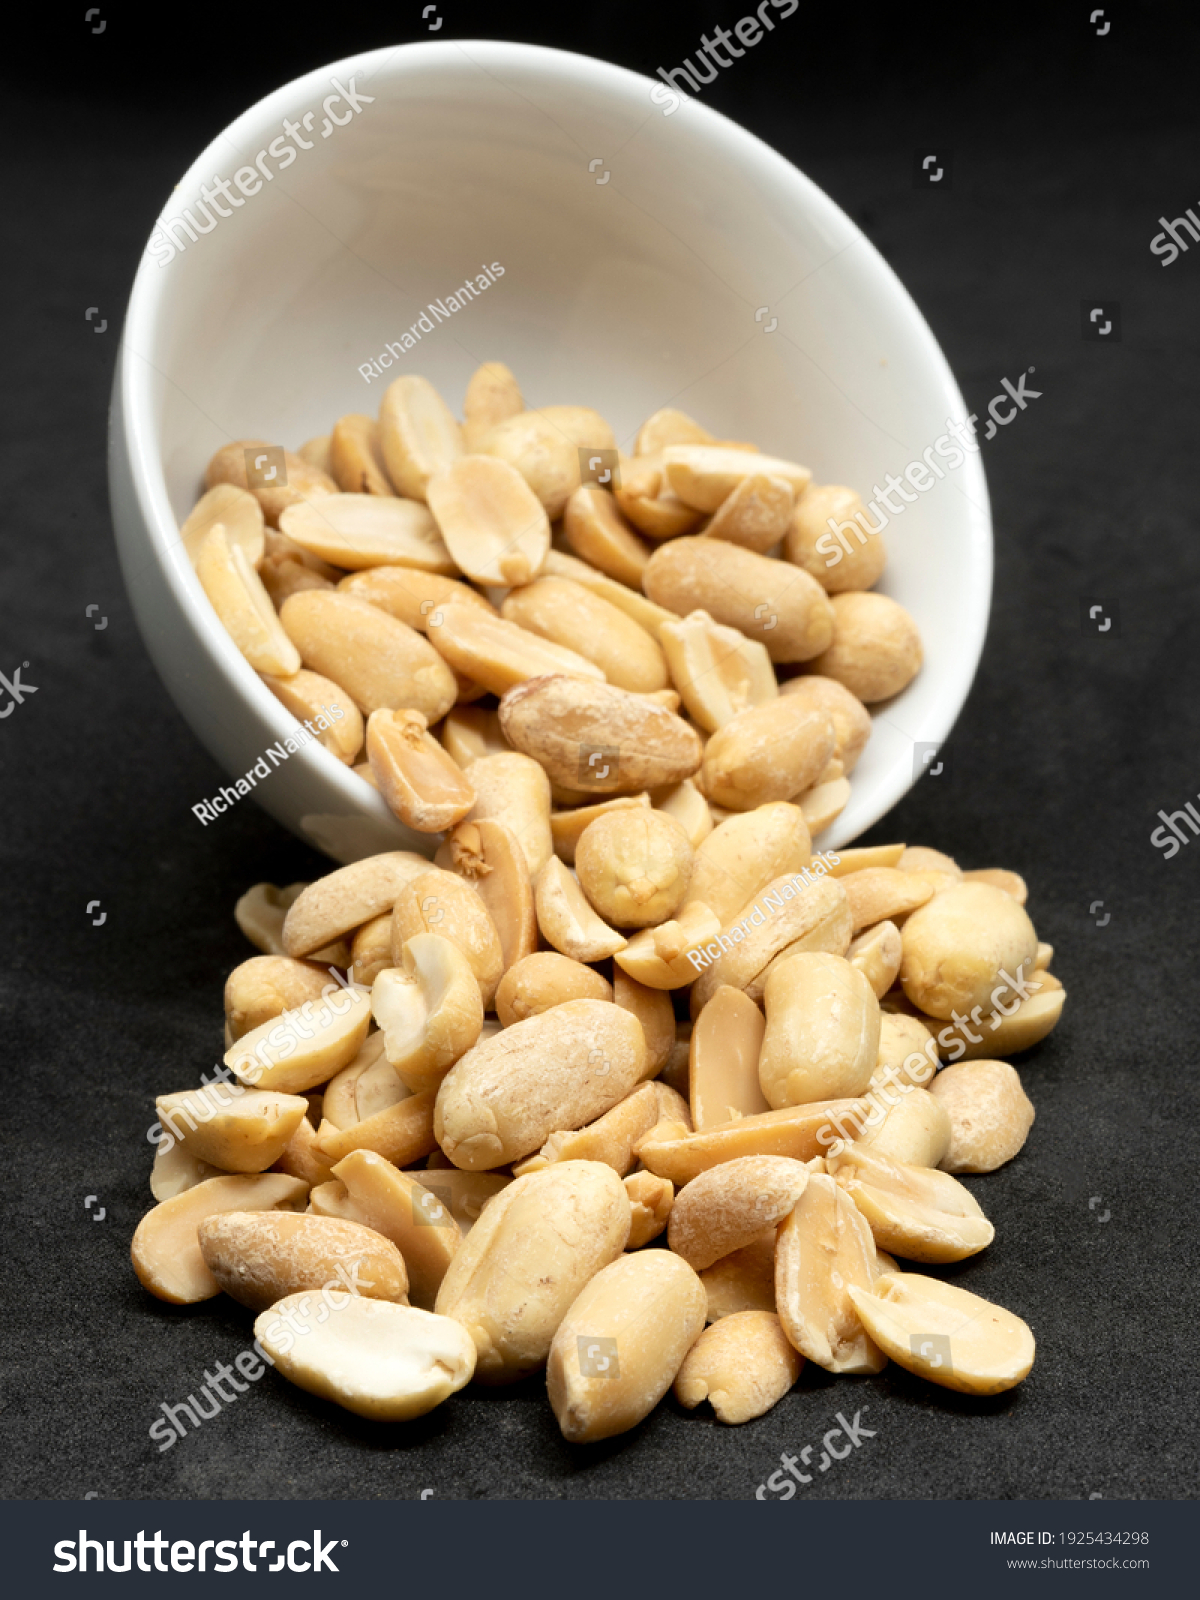 Unsalted peanuts in a withe bowl #1925434298